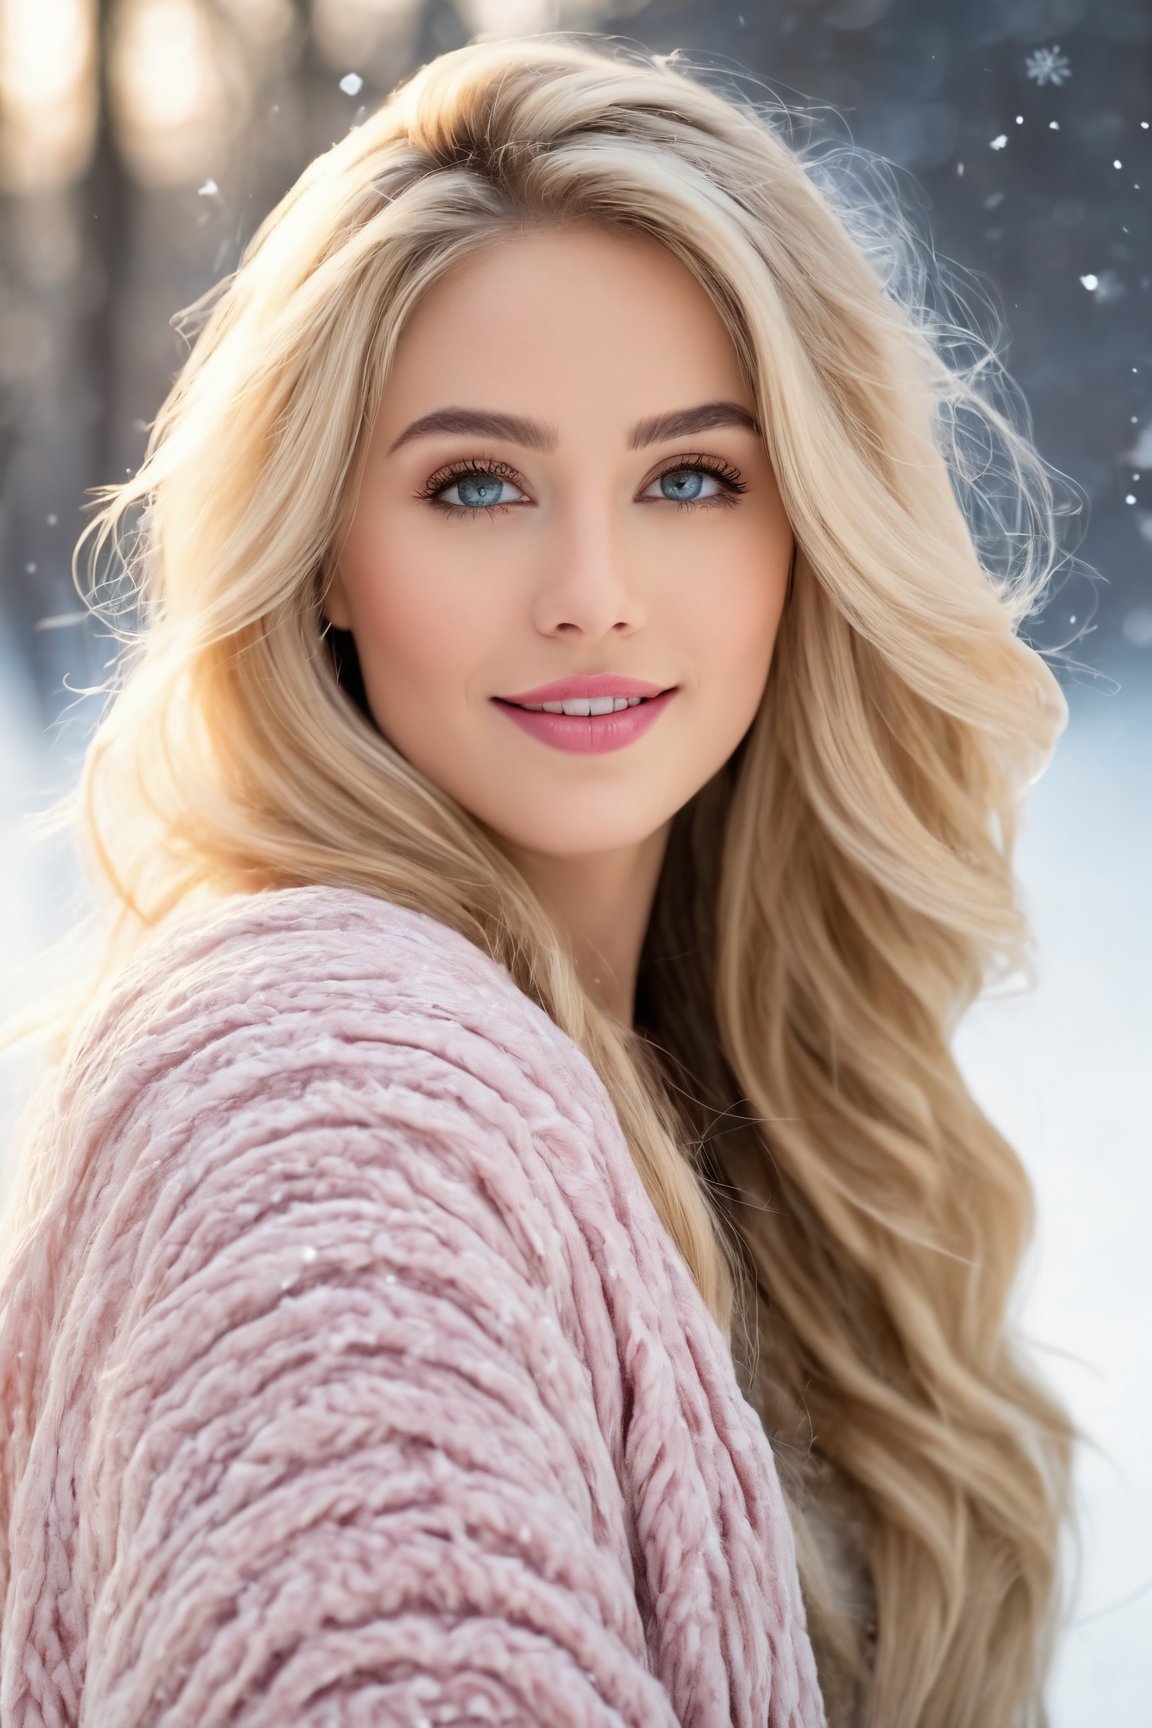 (best quality,  4k,  8k,  highres,  masterpiece:1.2),  ultra-detailed,  (realistic,  photorealistic,  photo-realistic:1.37),  portrait,  beautiful and smiling caucasian woman,  cinematic,  winter clothes,  Ondas e Nuances,  detailed symmetric hazel eyes,  circular iris,  vivid colors,  winter scenery,  soft snowflakes falling,  icy breath,  rosy cheeks,  pure white background,  subtle warm lighting,  innocence and radiance,  sparkling eyes,  joyful expression,  luxurious fur trim on the clothing,  frosty winter air,  subtle wind blowing through her hair,  subtle hint of pink in her lips,  elegant posture,  confident stance,  delicate snowflakes decorating her hair,  long flowing blonde hair,  wonder and serenity in her gaze,  captivating beauty,  snow-covered trees in the background,  peaceful and enchanting winter scene.